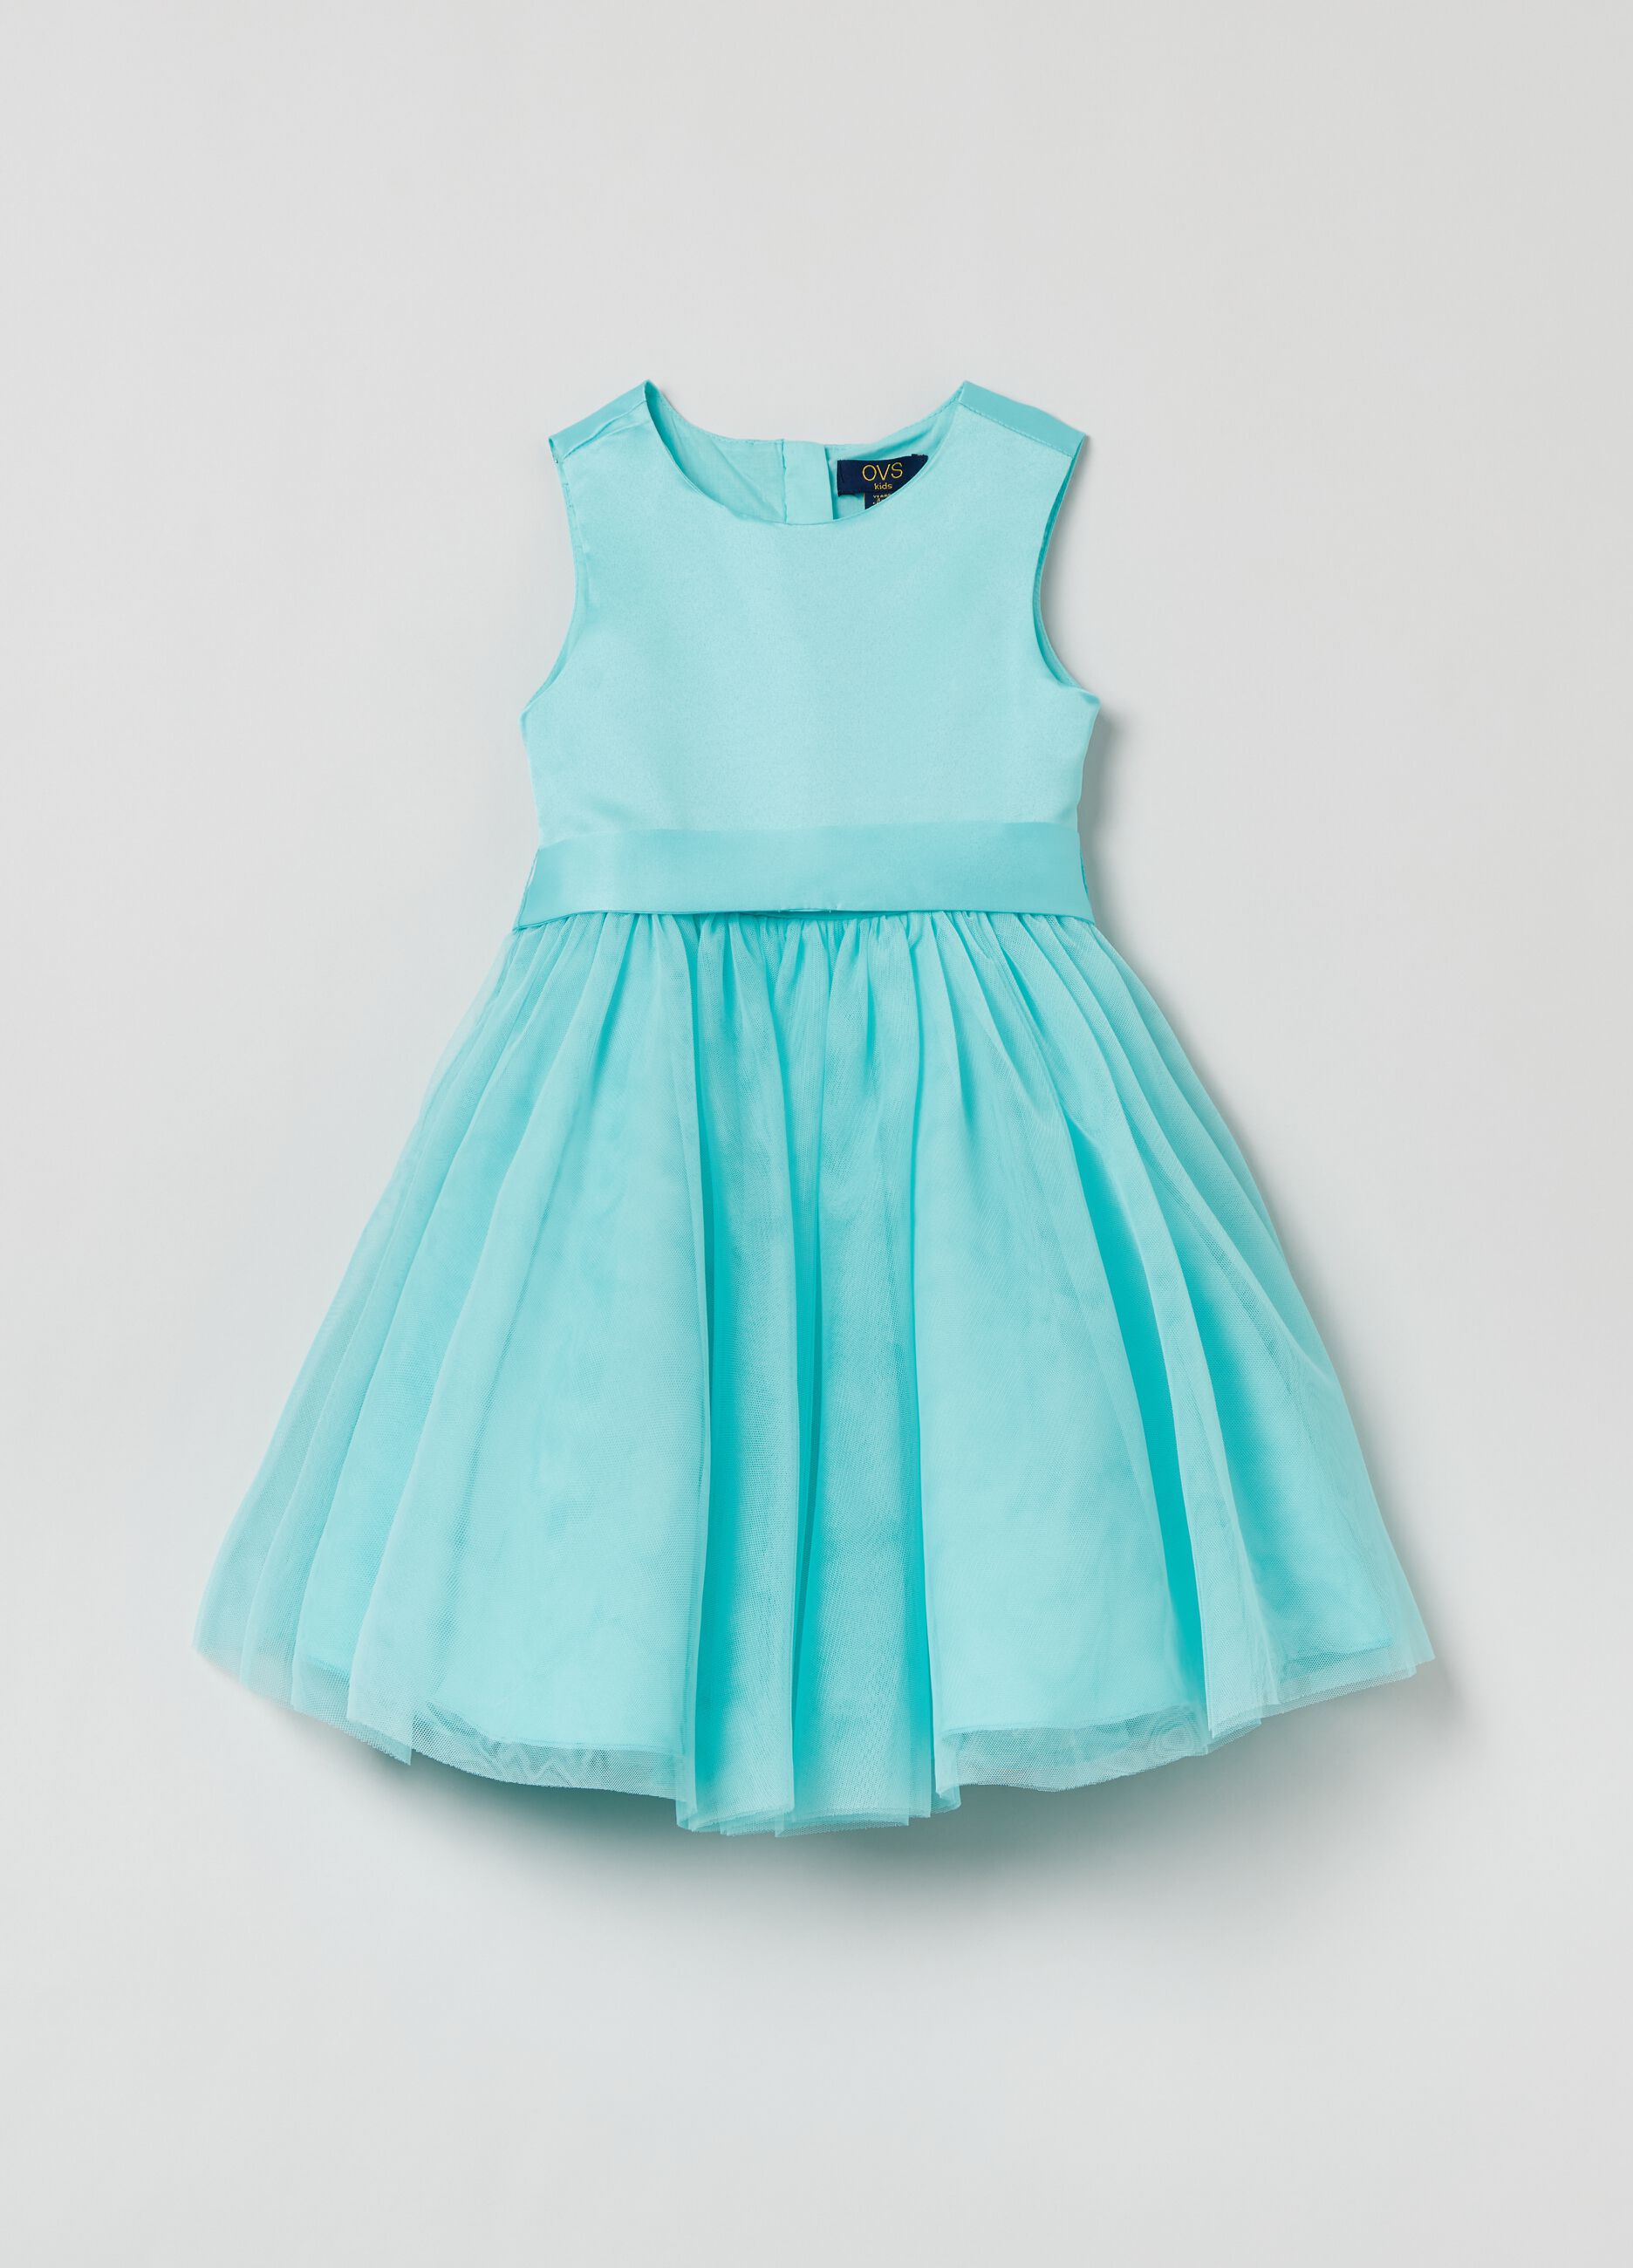 Satin dress with tulle skirt